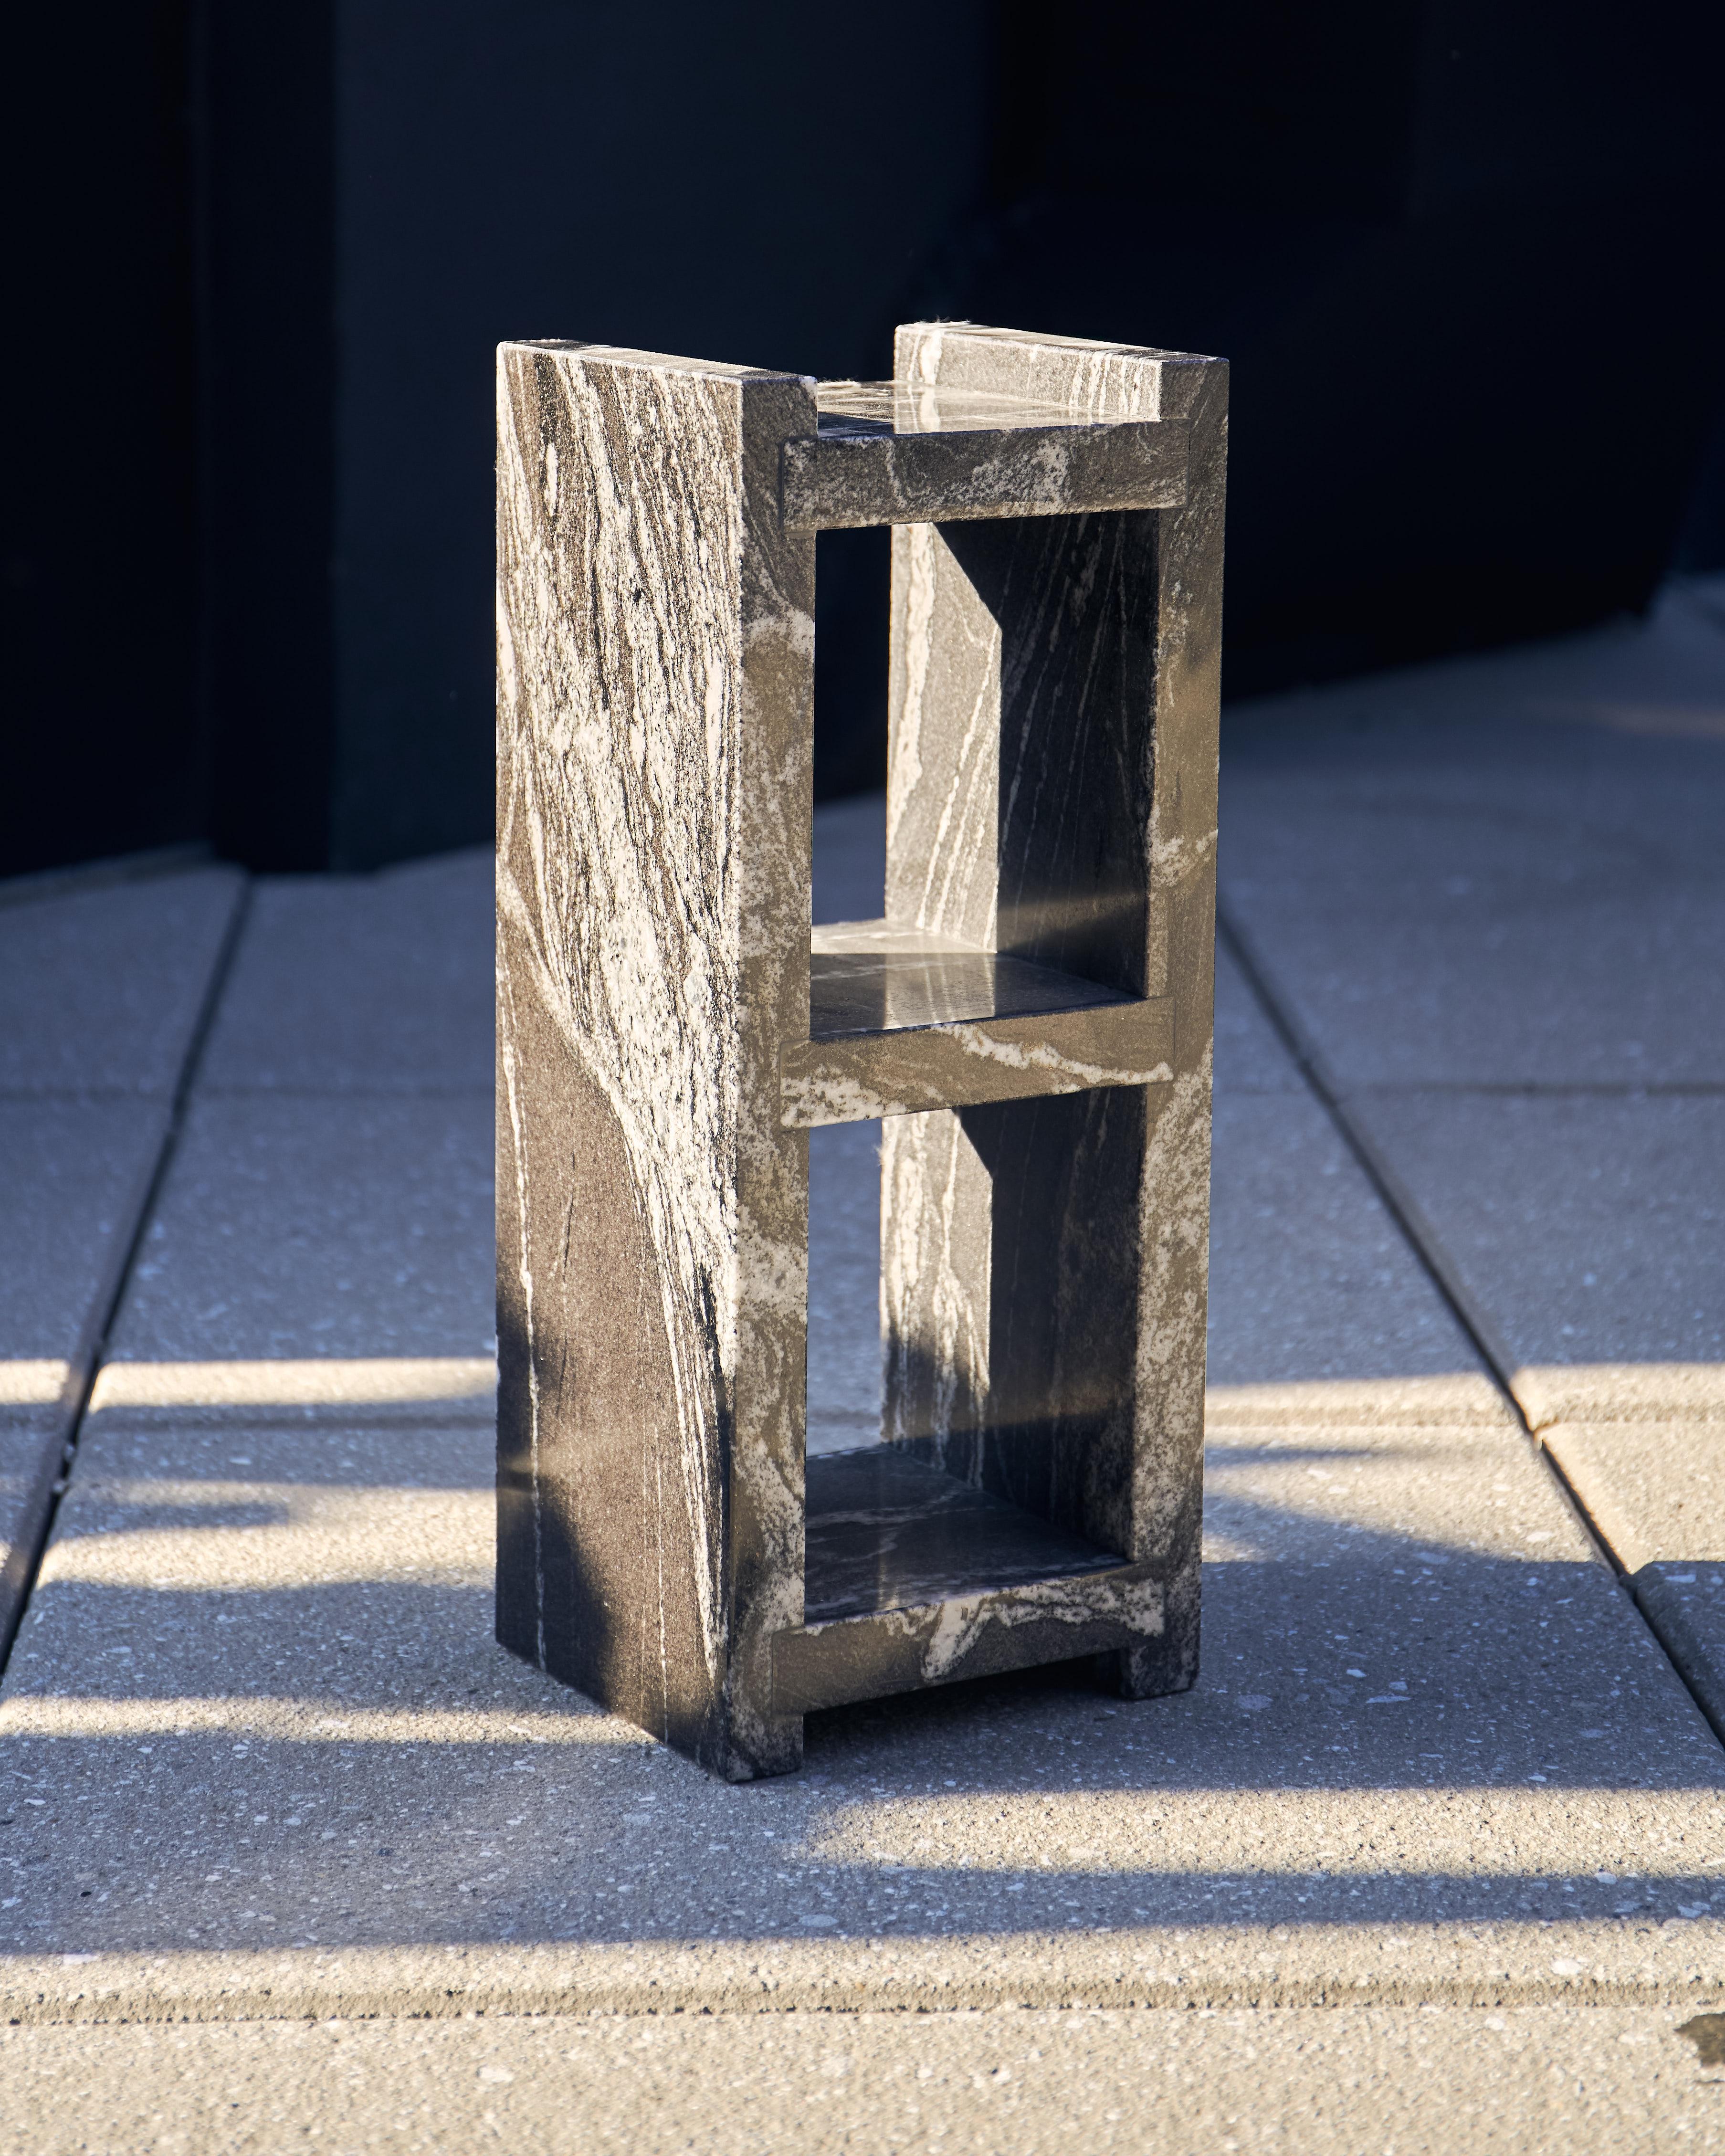 1 water jet cut, hand-polished nero marquina marble block, supporting a tempered glass table top.
Starphire glass top.
Modular.
Made to order in nyc.

Dimensions
Cinder Block length 18.75?
Cinder block width 7.5” 
Cinder block thickness